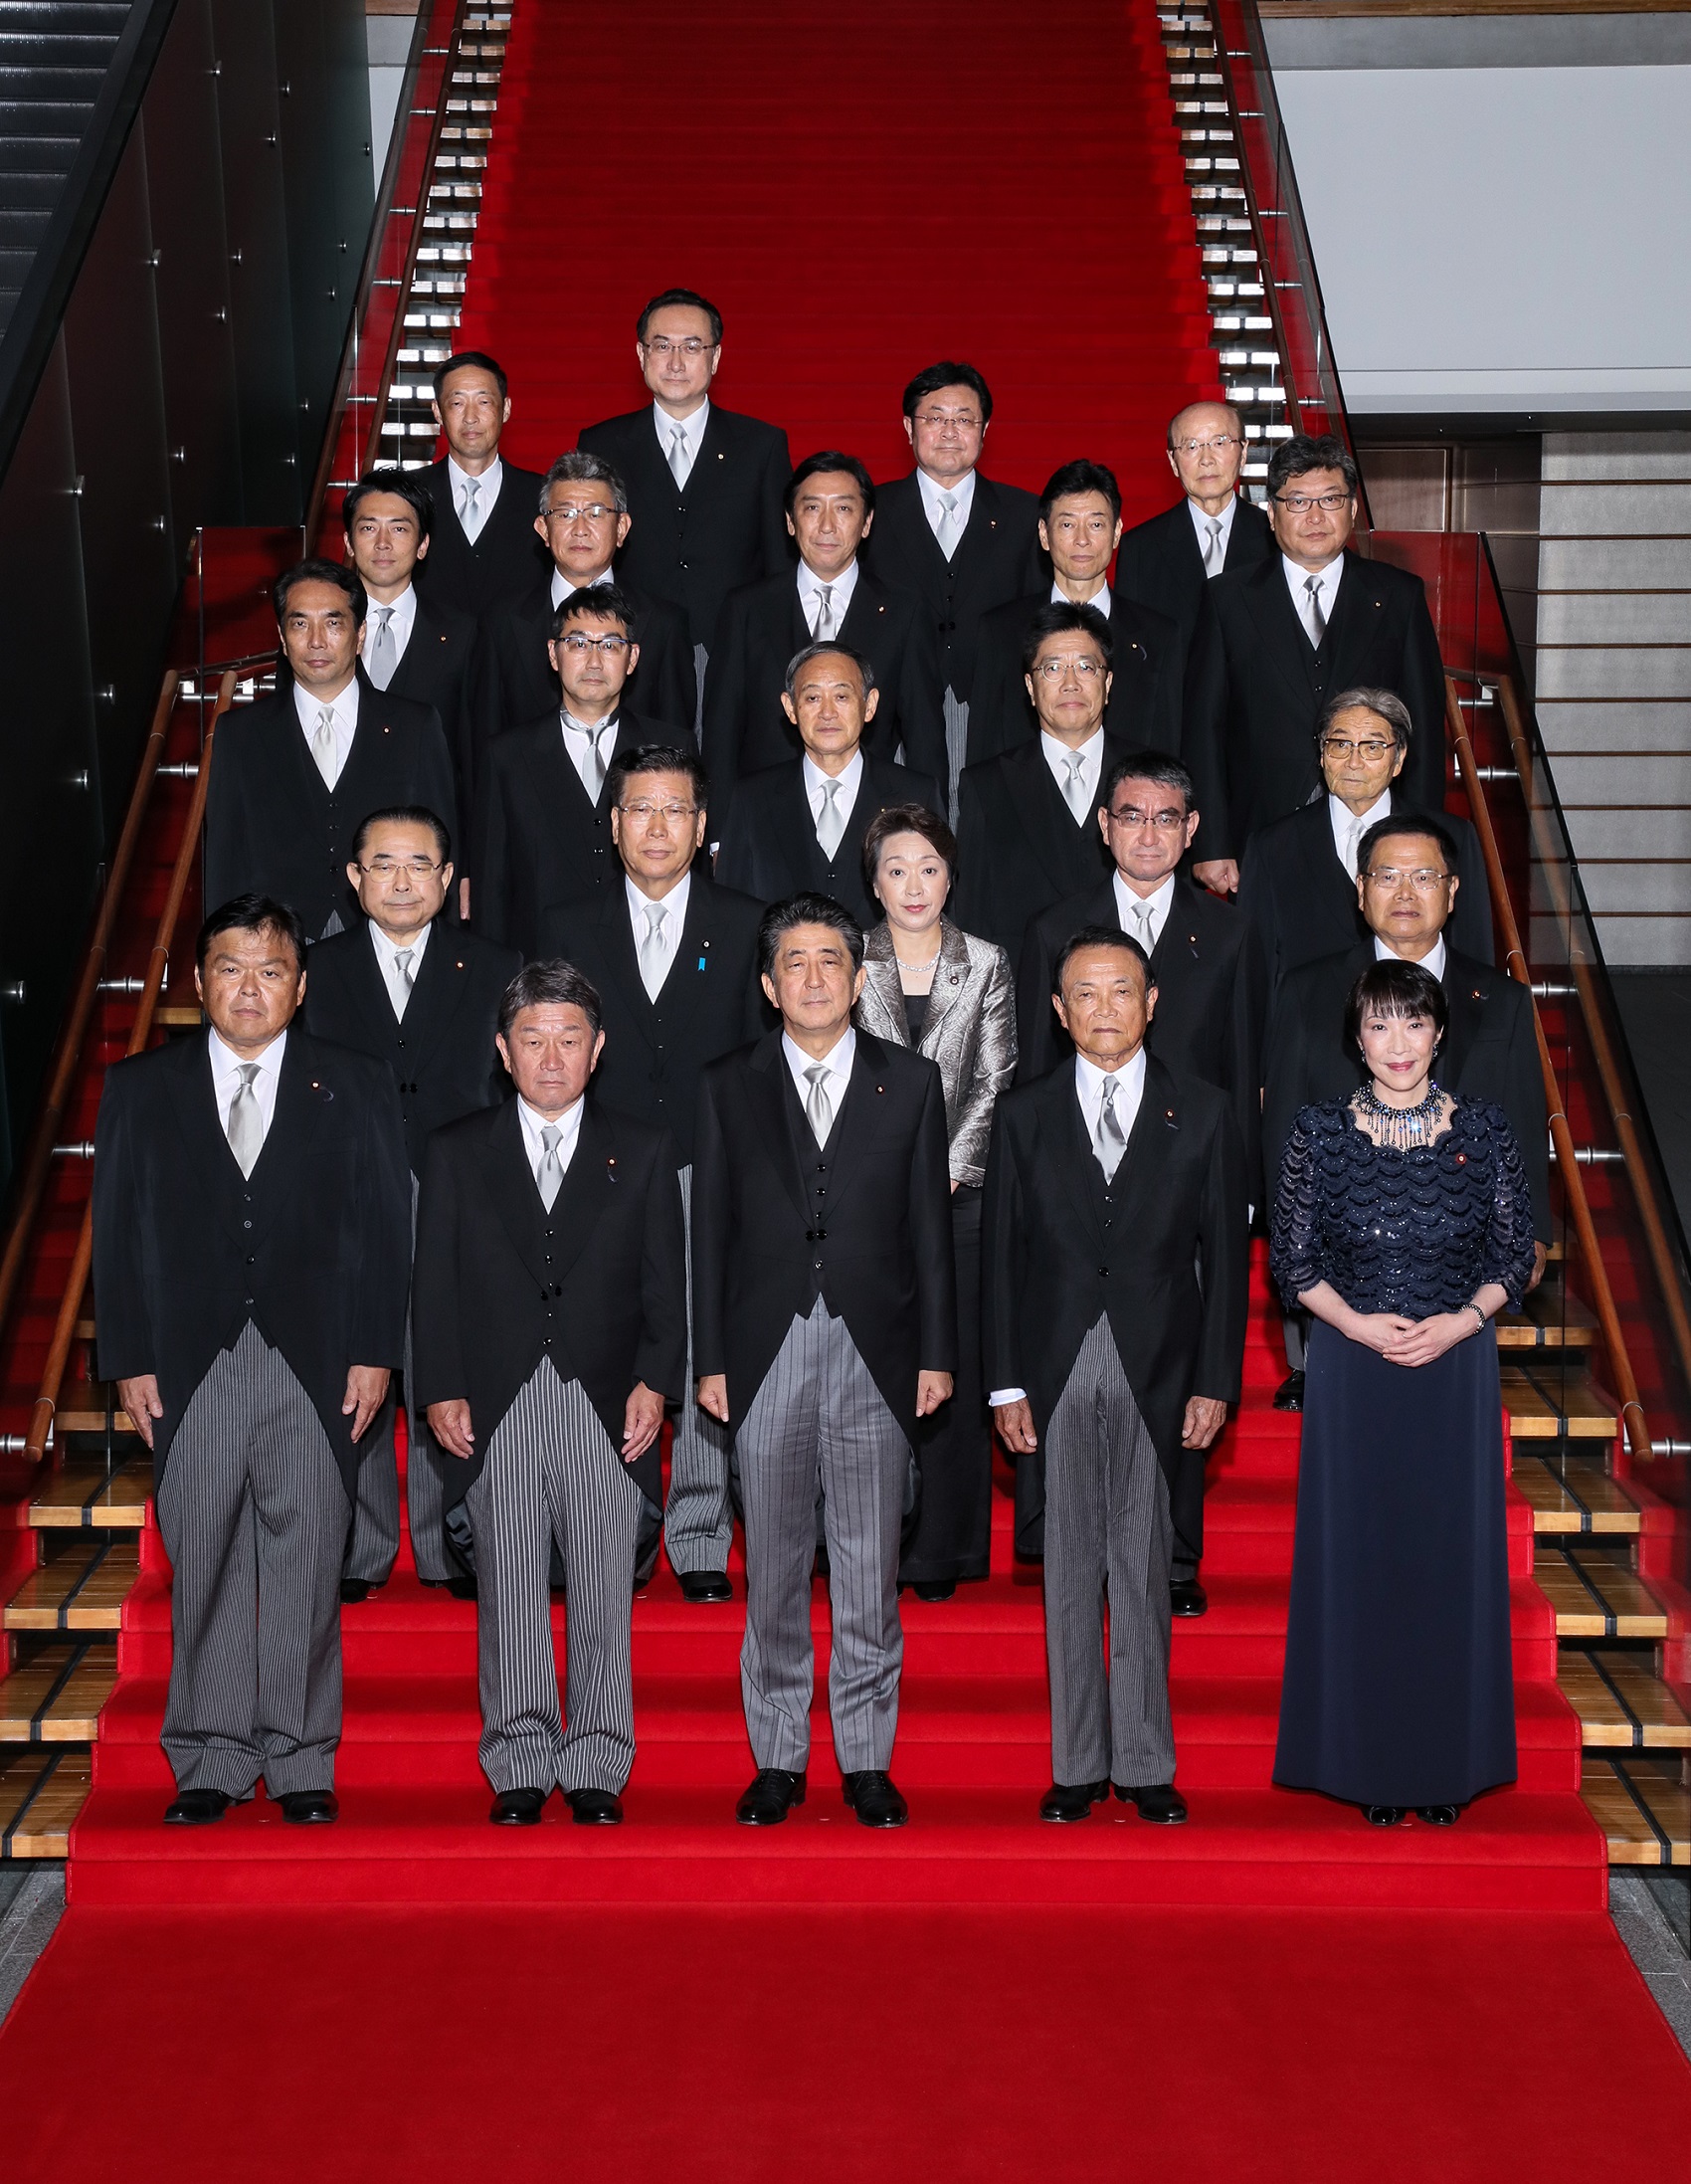 Inauguration Of The Second Reshuffled Fourth Abe Cabinet The Prime